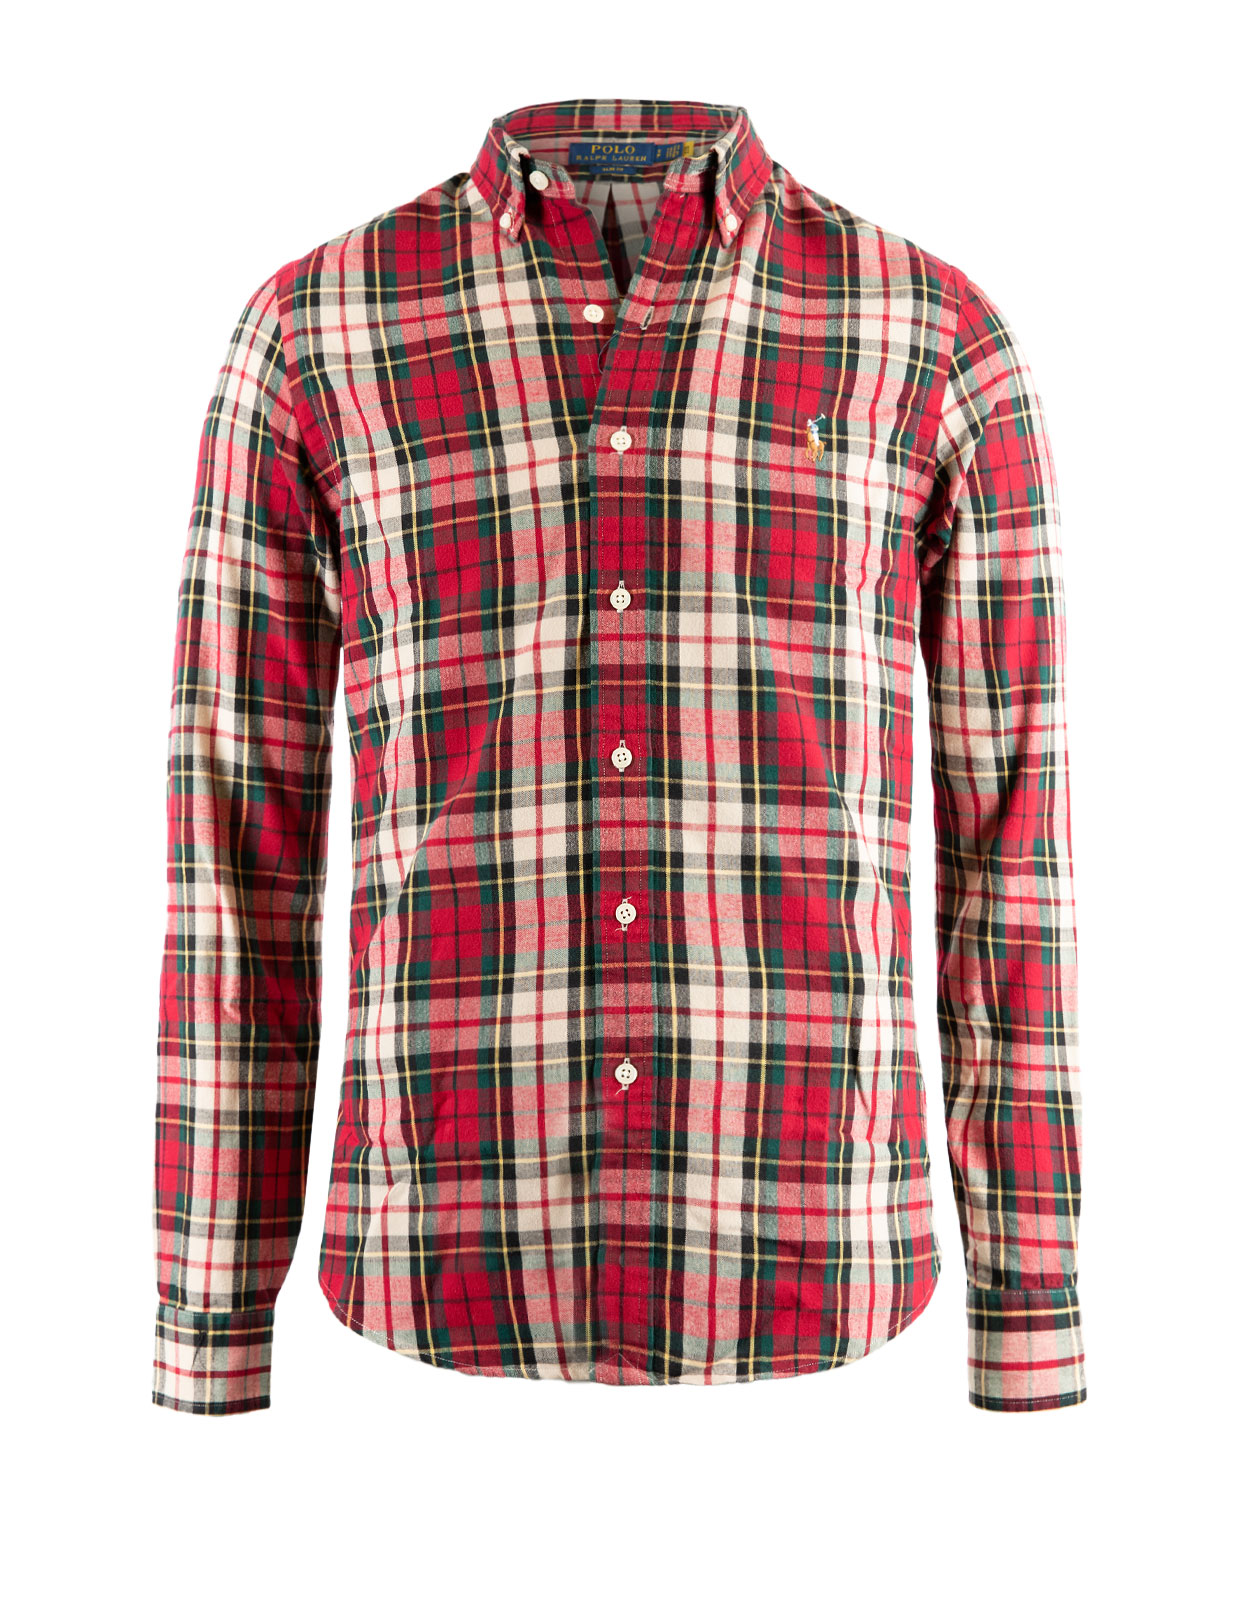 Checked Sport Shirt Red/White Multi